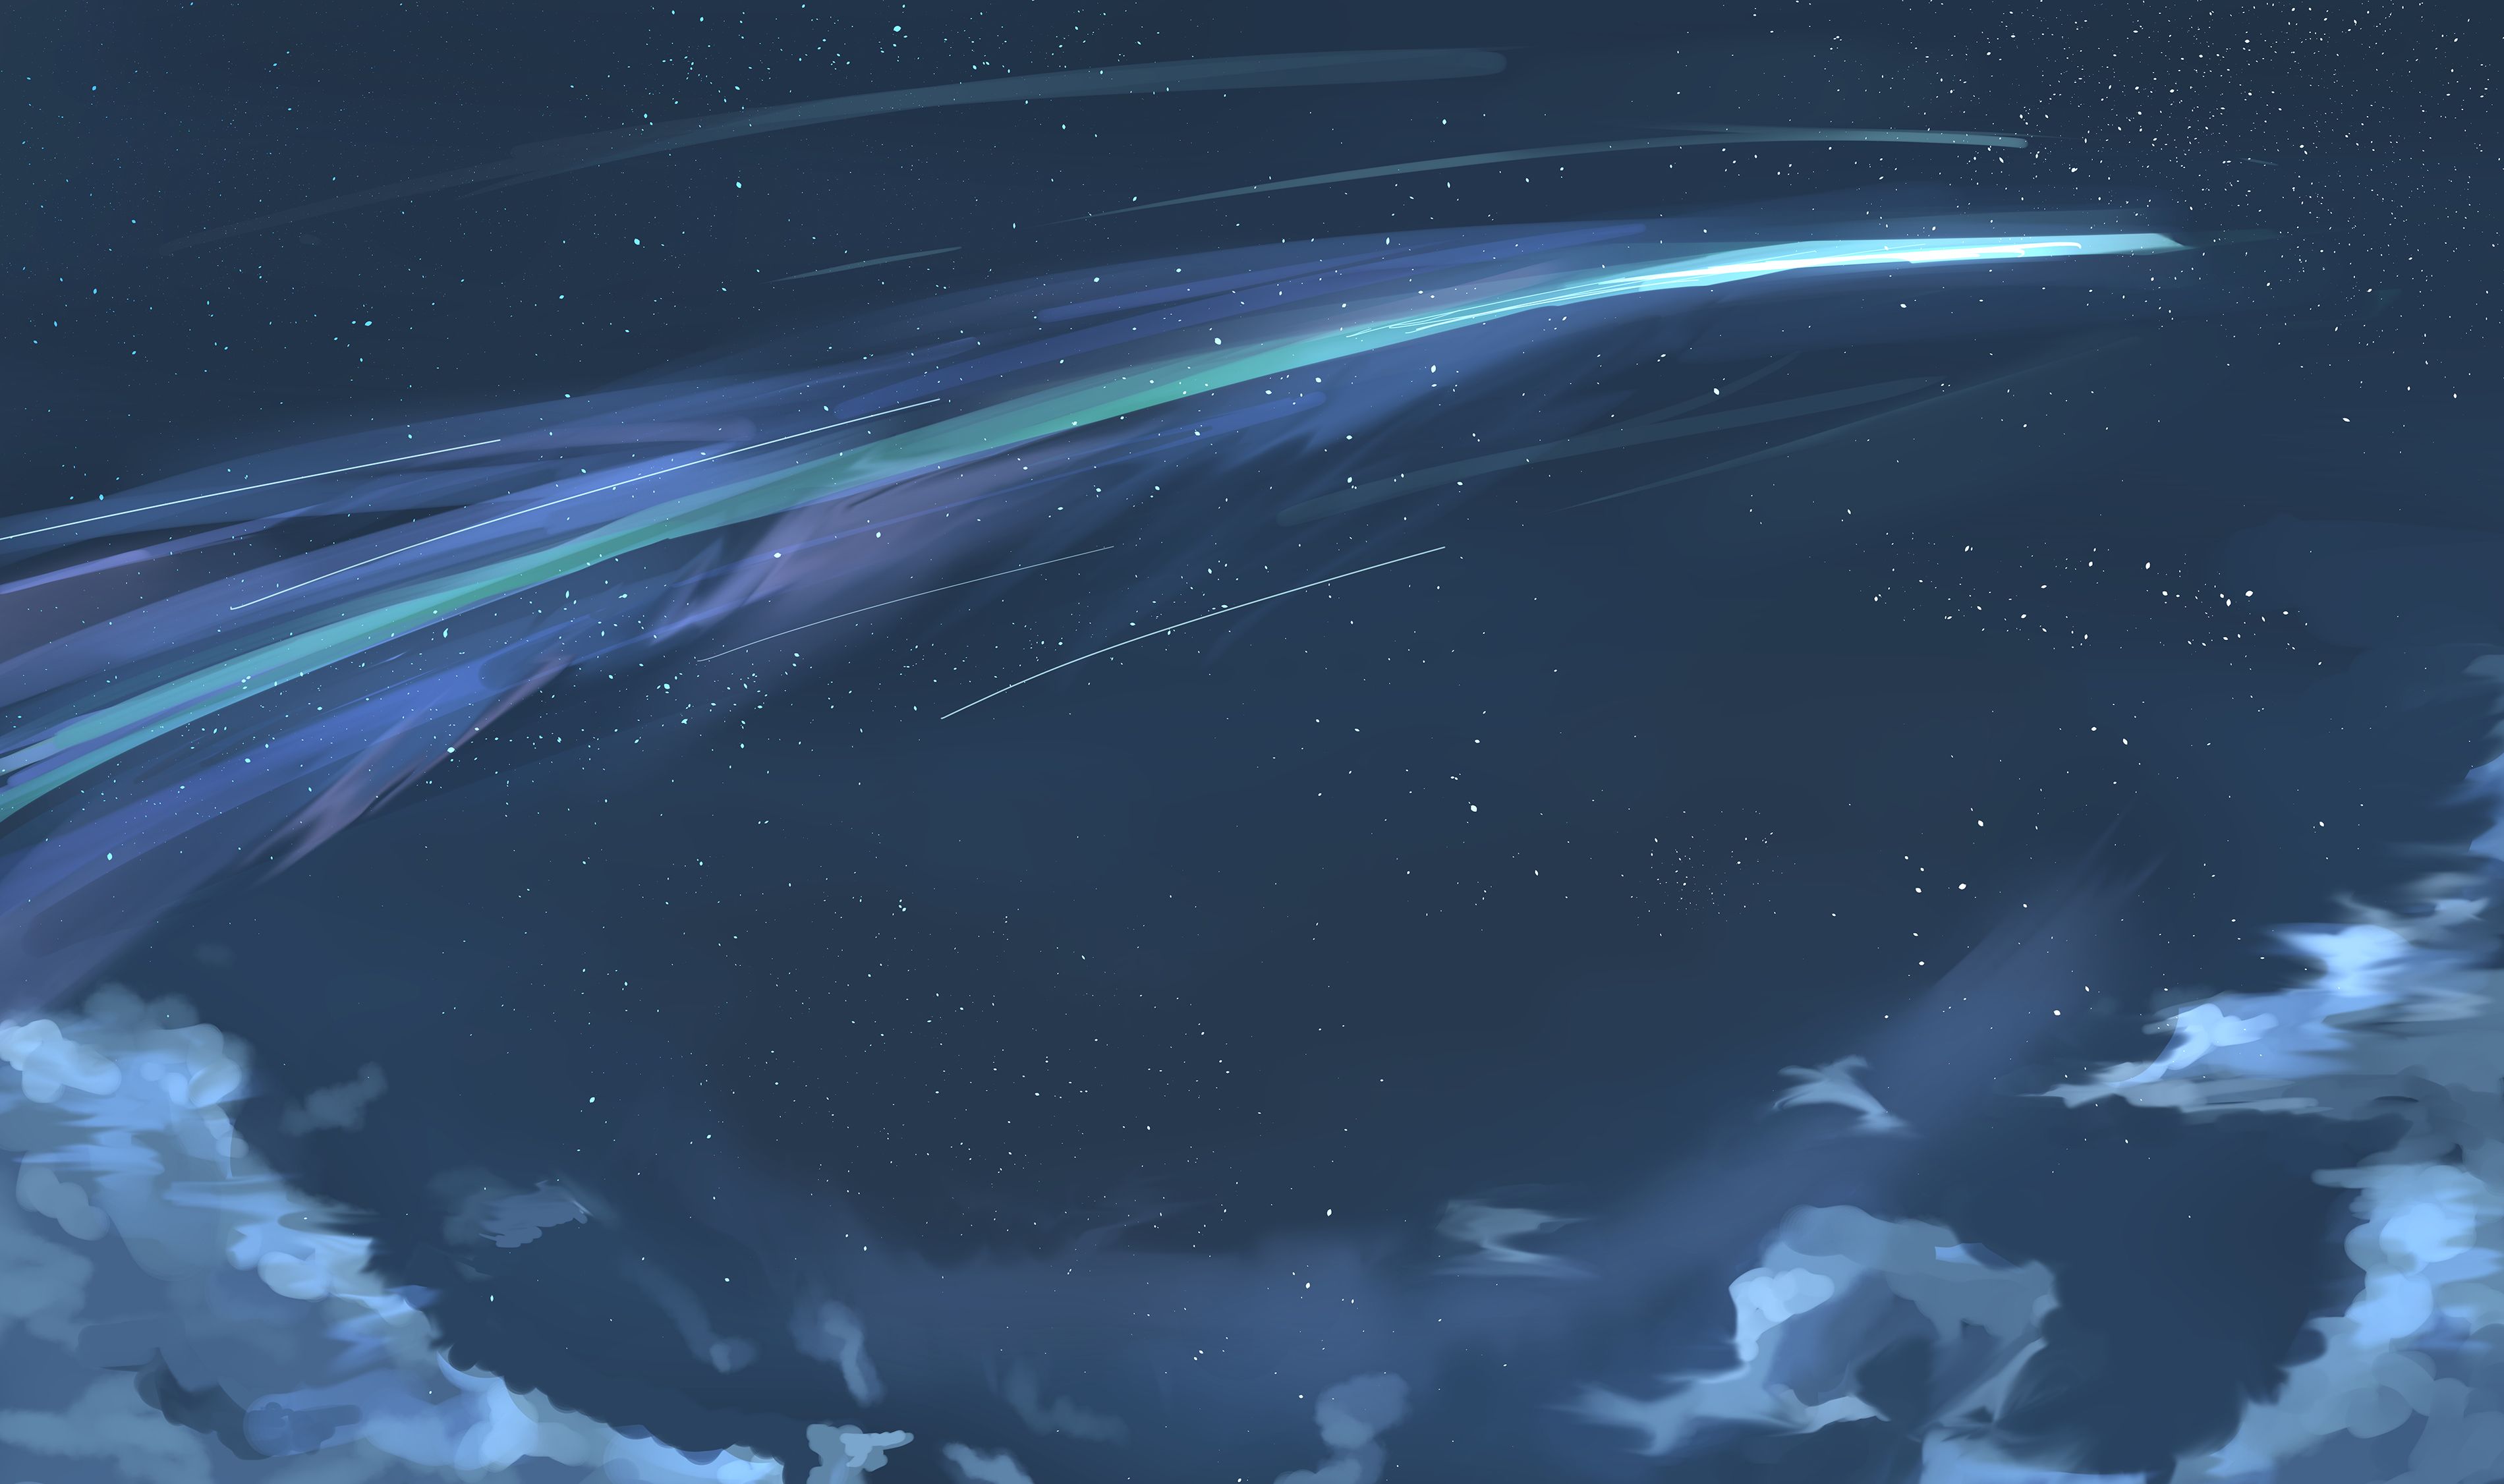 Download Subtle Anime Lighthouse And Starry Sky Wallpaper | Wallpapers.com